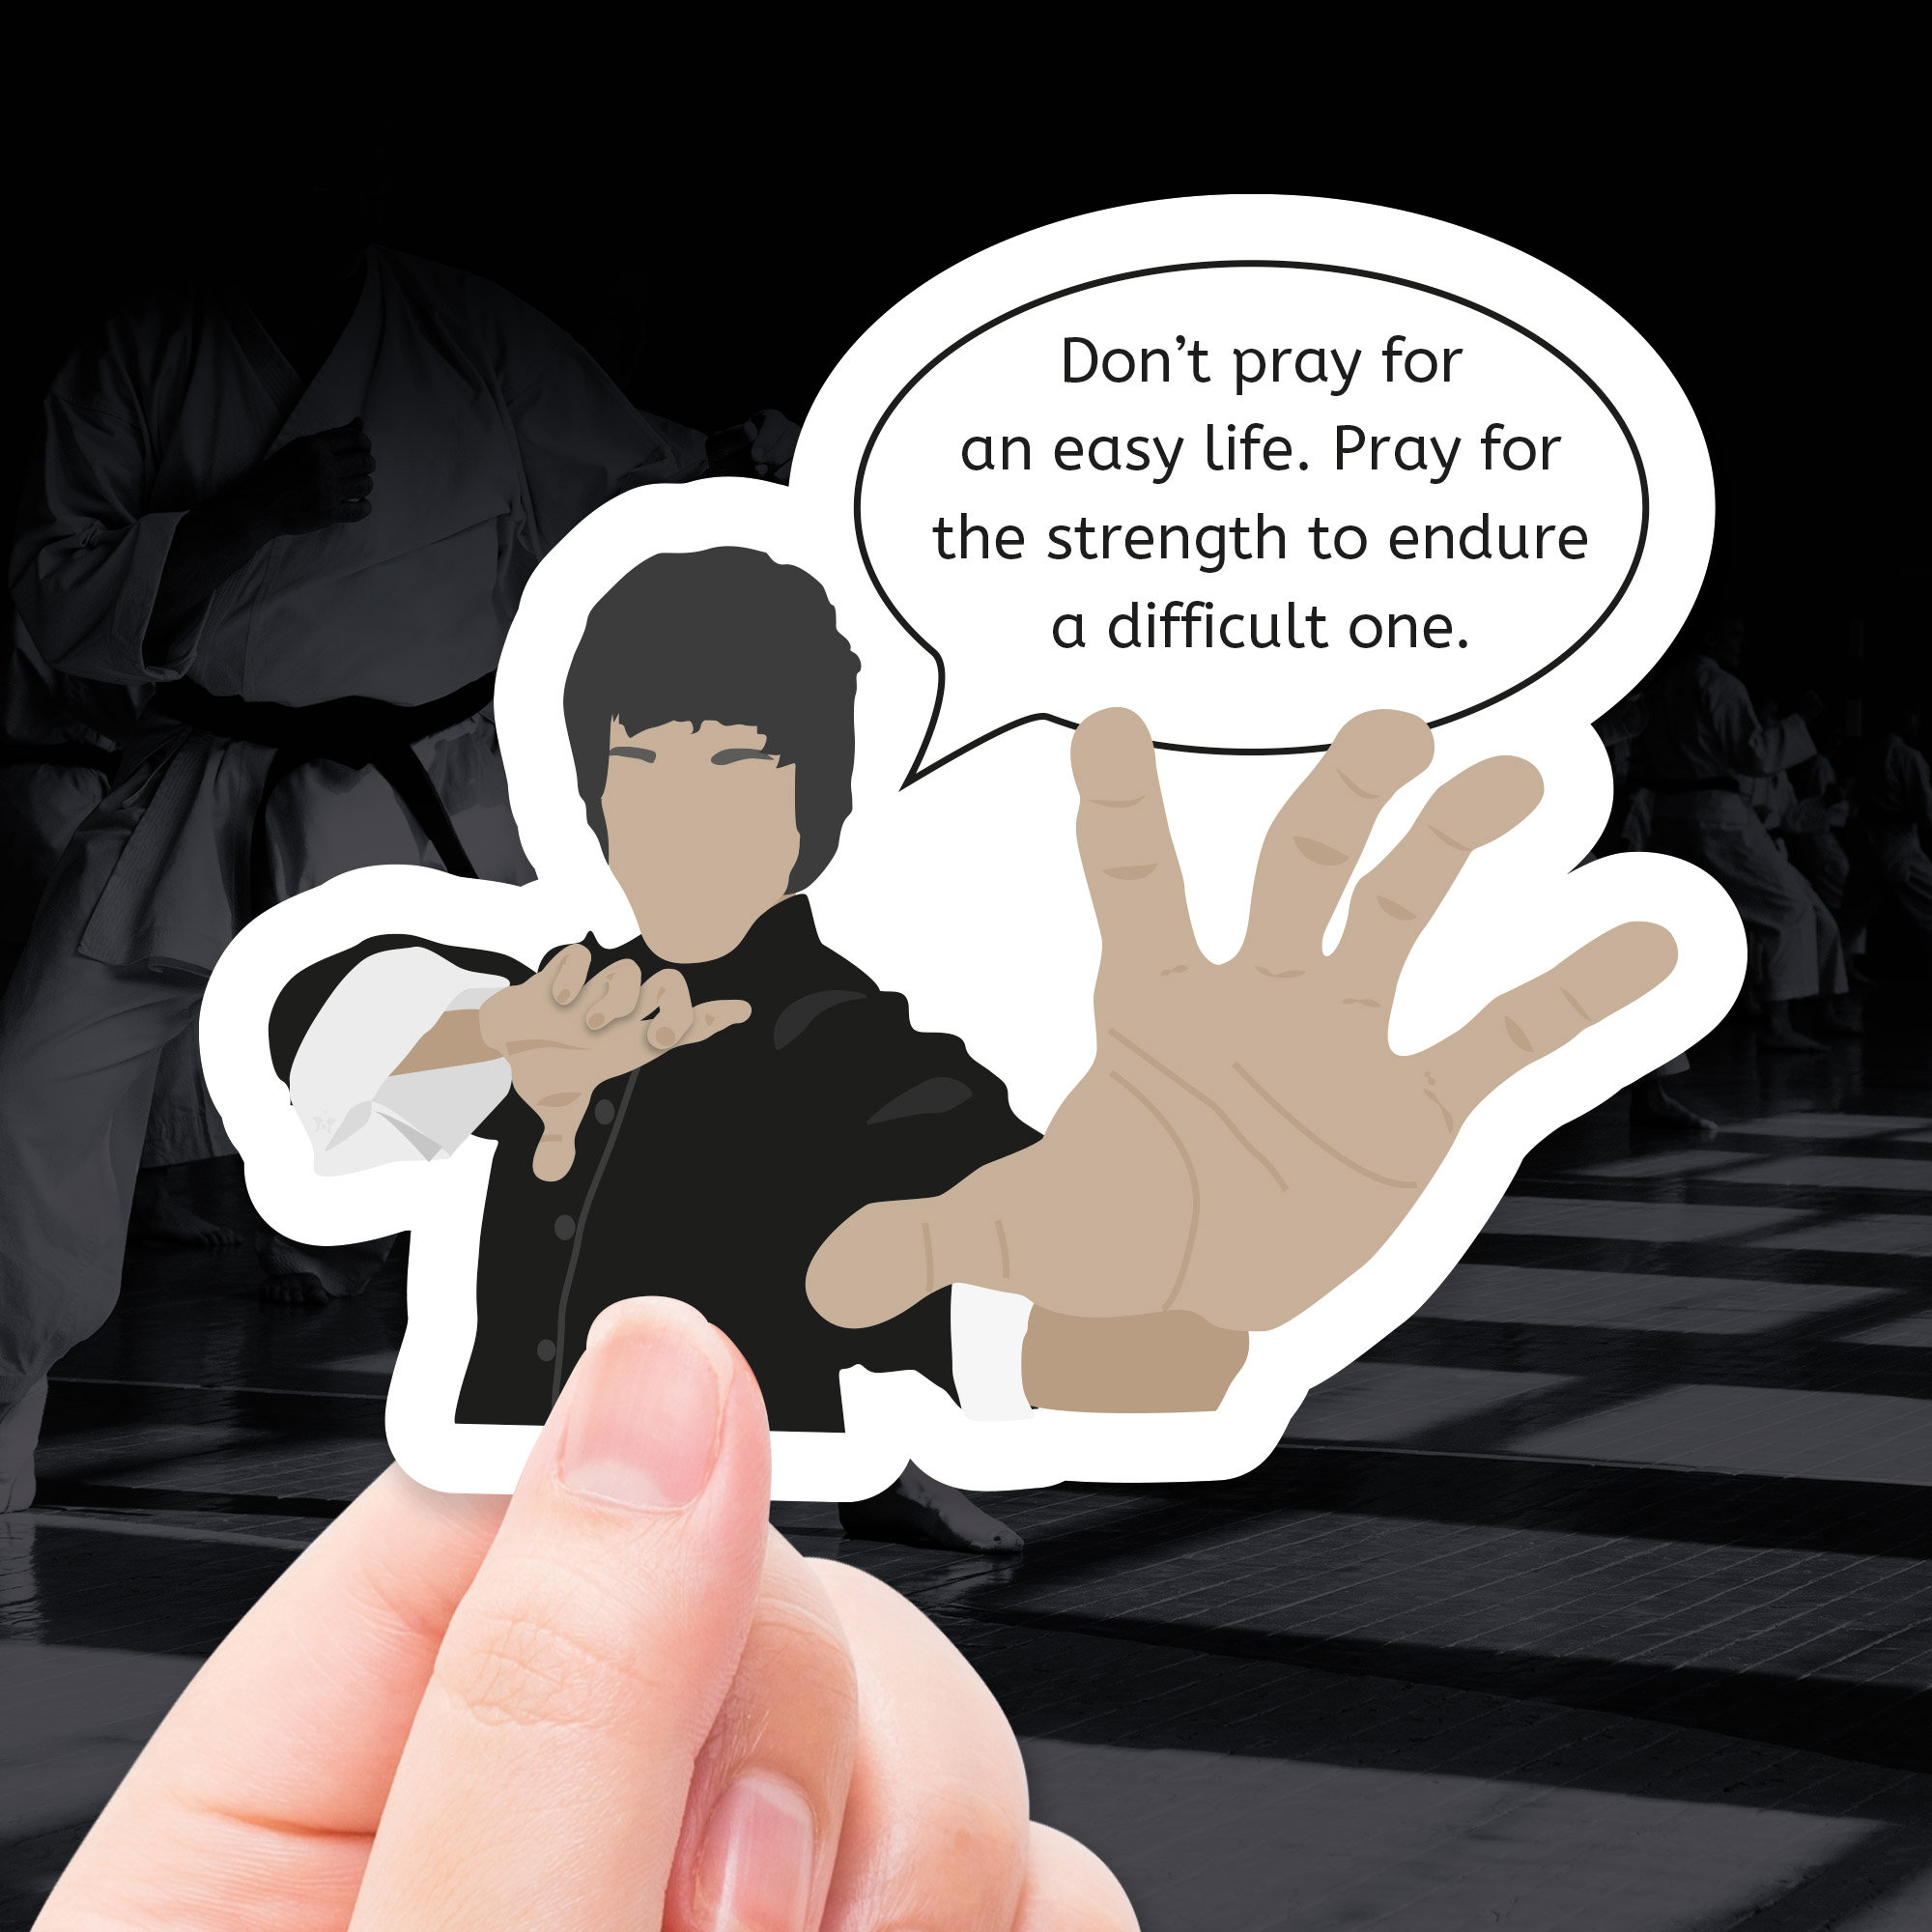 Imma pray for you vinyl sticker, funny stickers, Christian stickers,  motivational laptop stickers, water bottle stickers